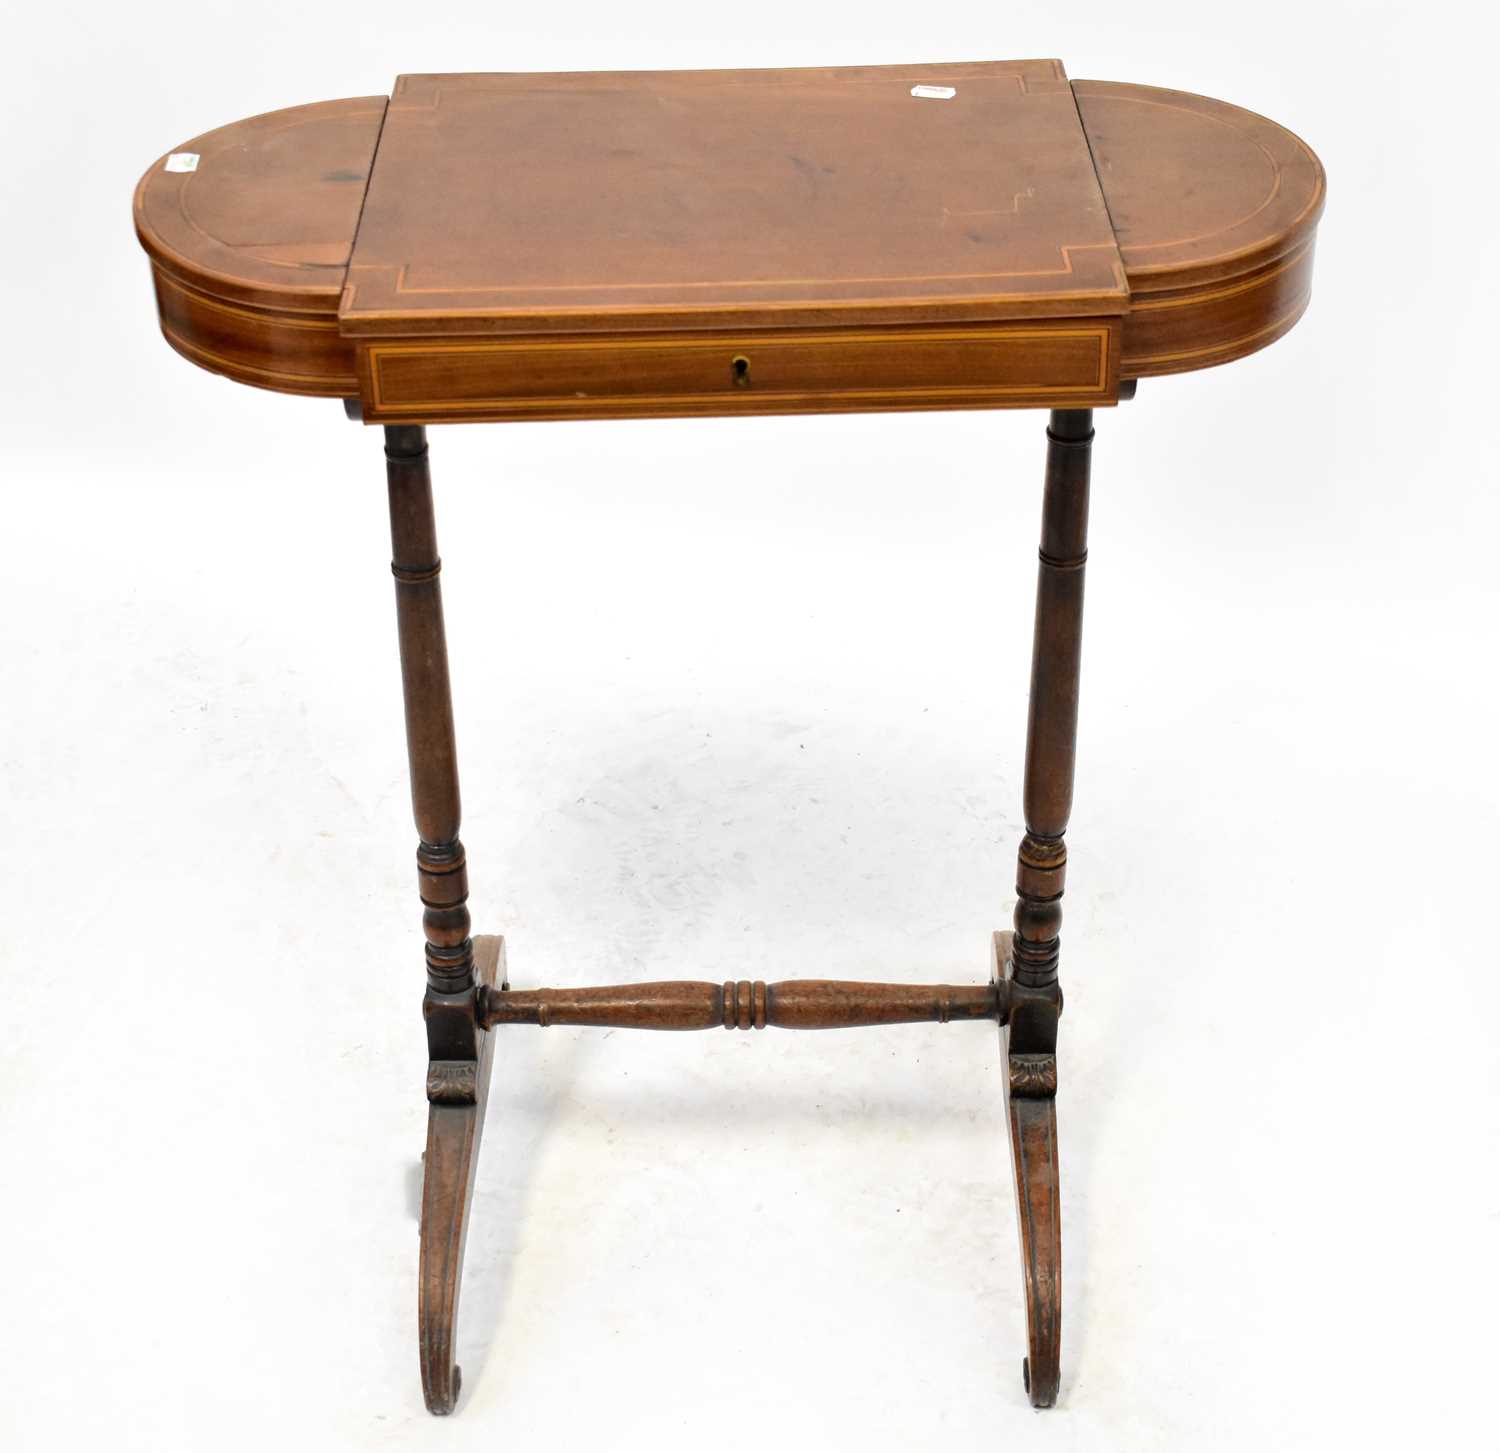 An Edwardian lozenge-shaped mahogany sewing table with three-section lift-up fitted top, 76 x 65 x